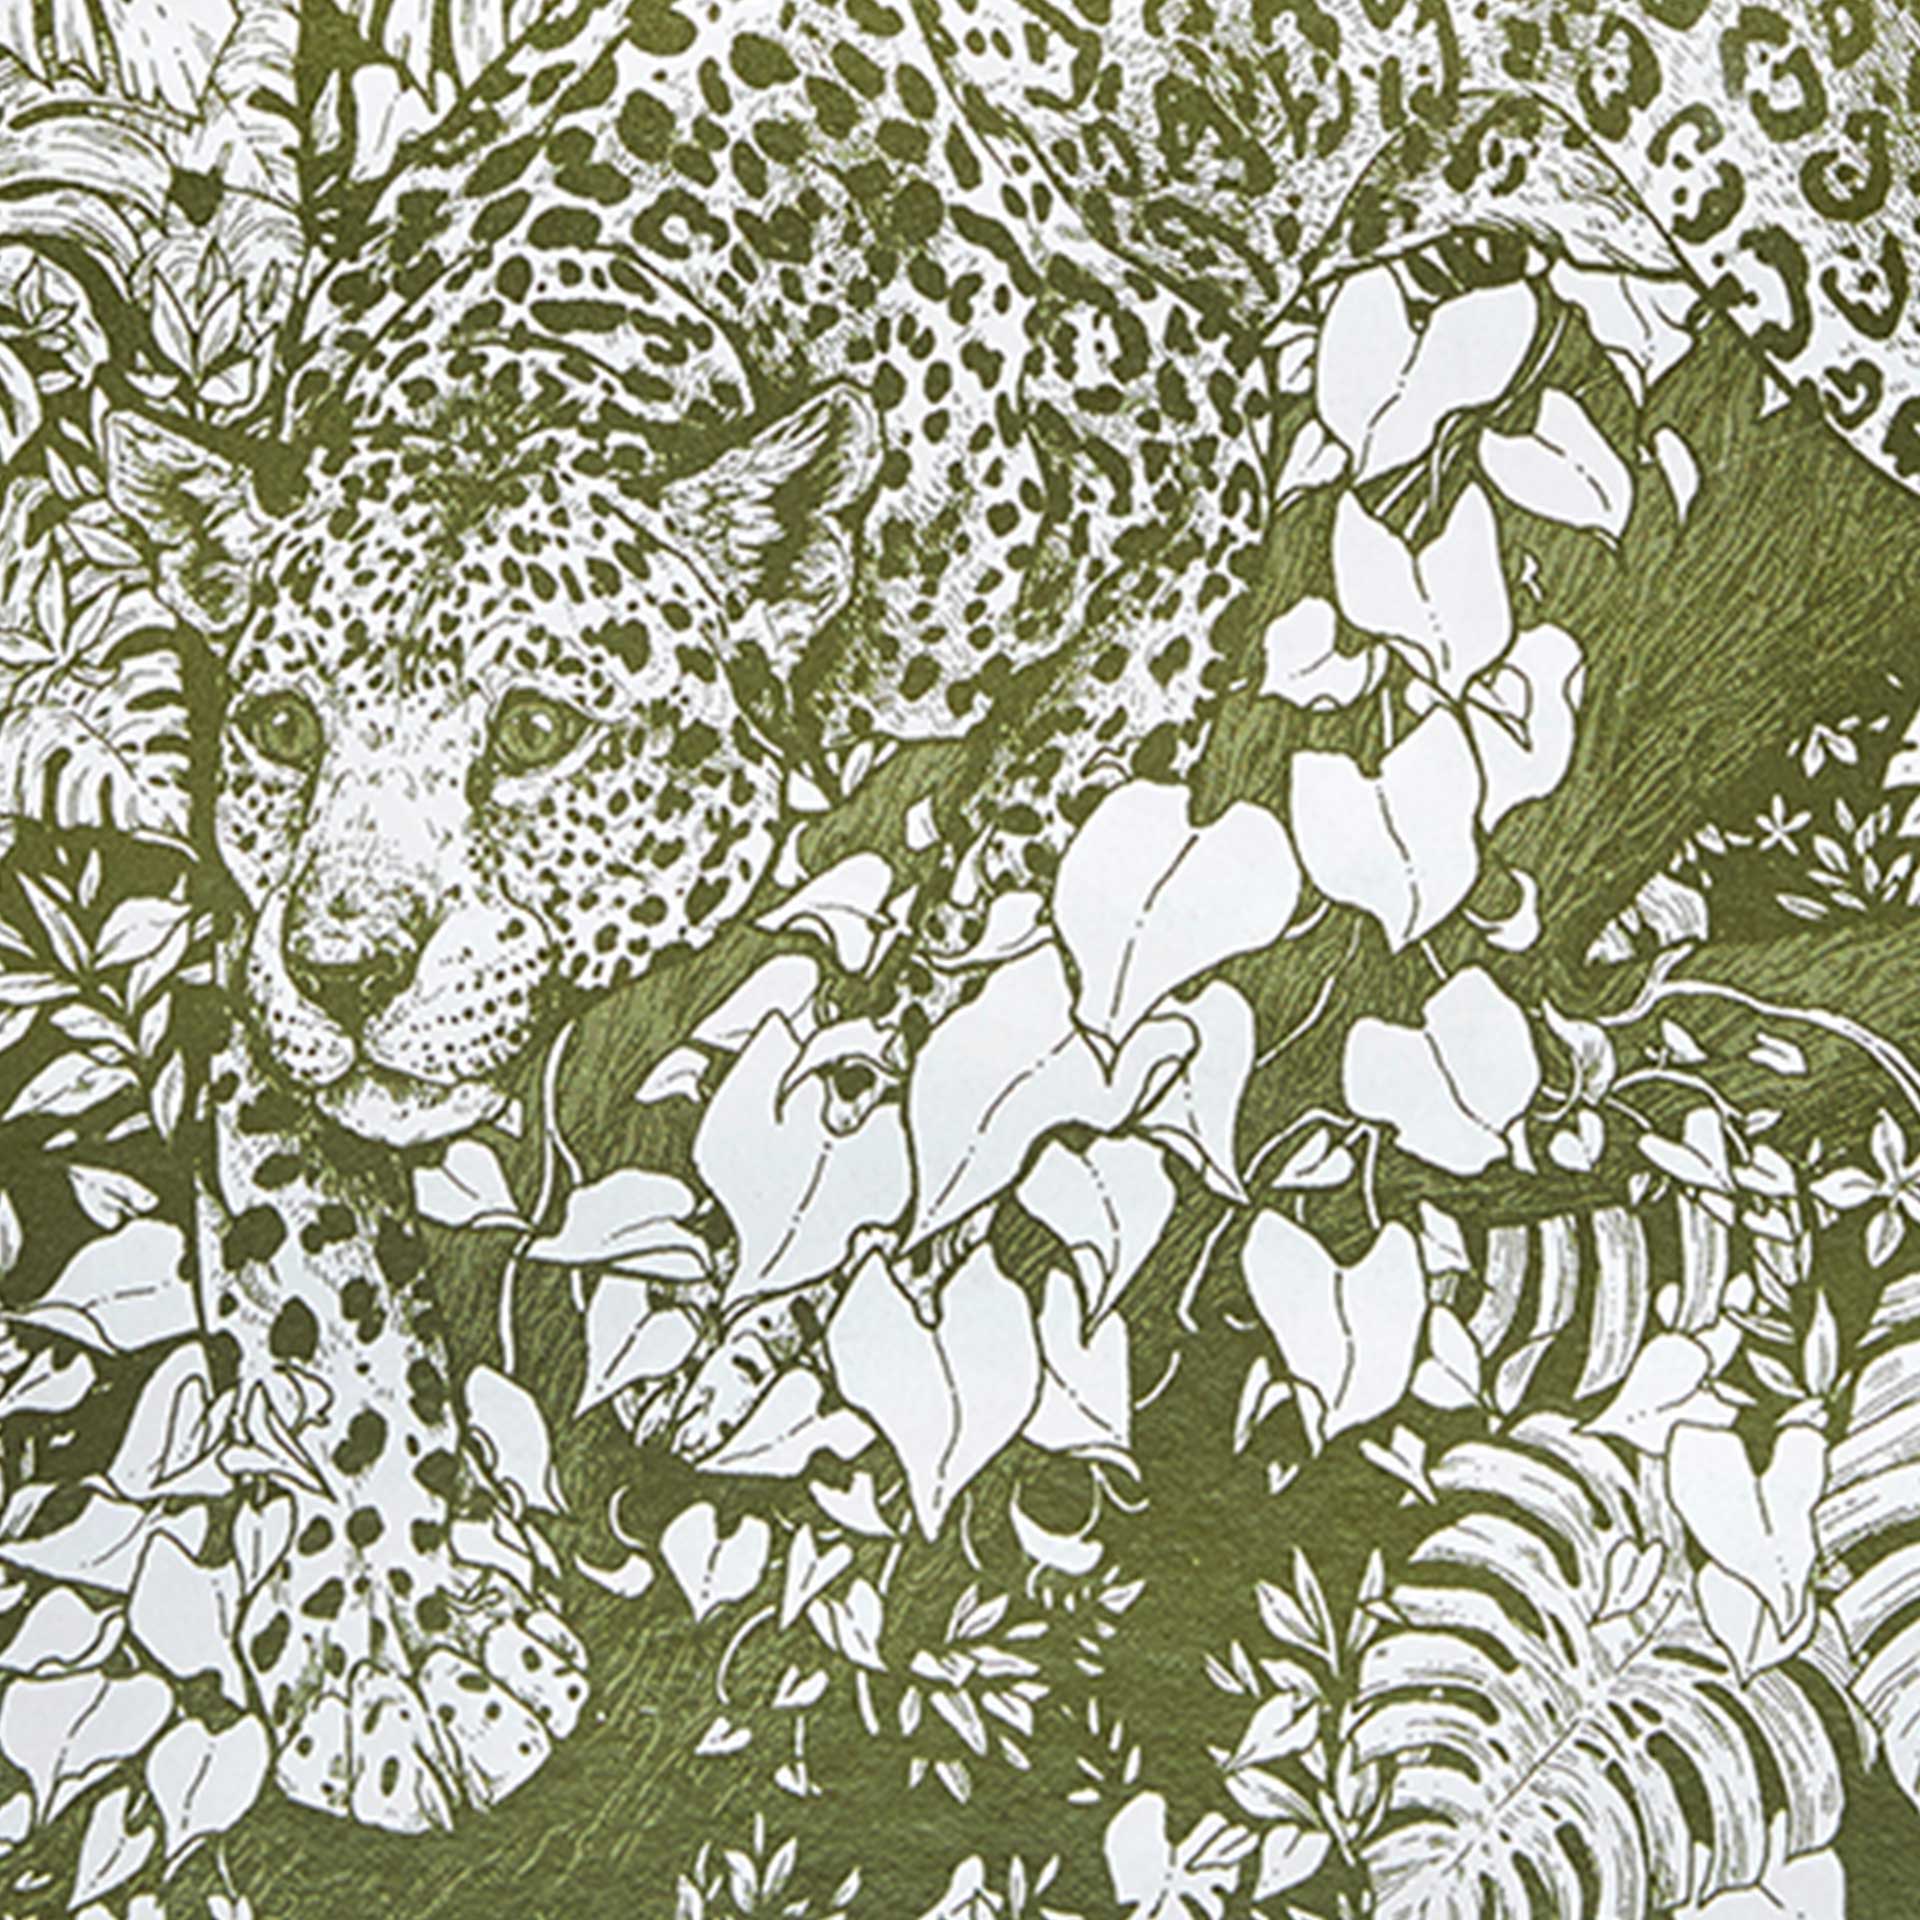 Closeup of a jaguar crouched in a forest printed in green